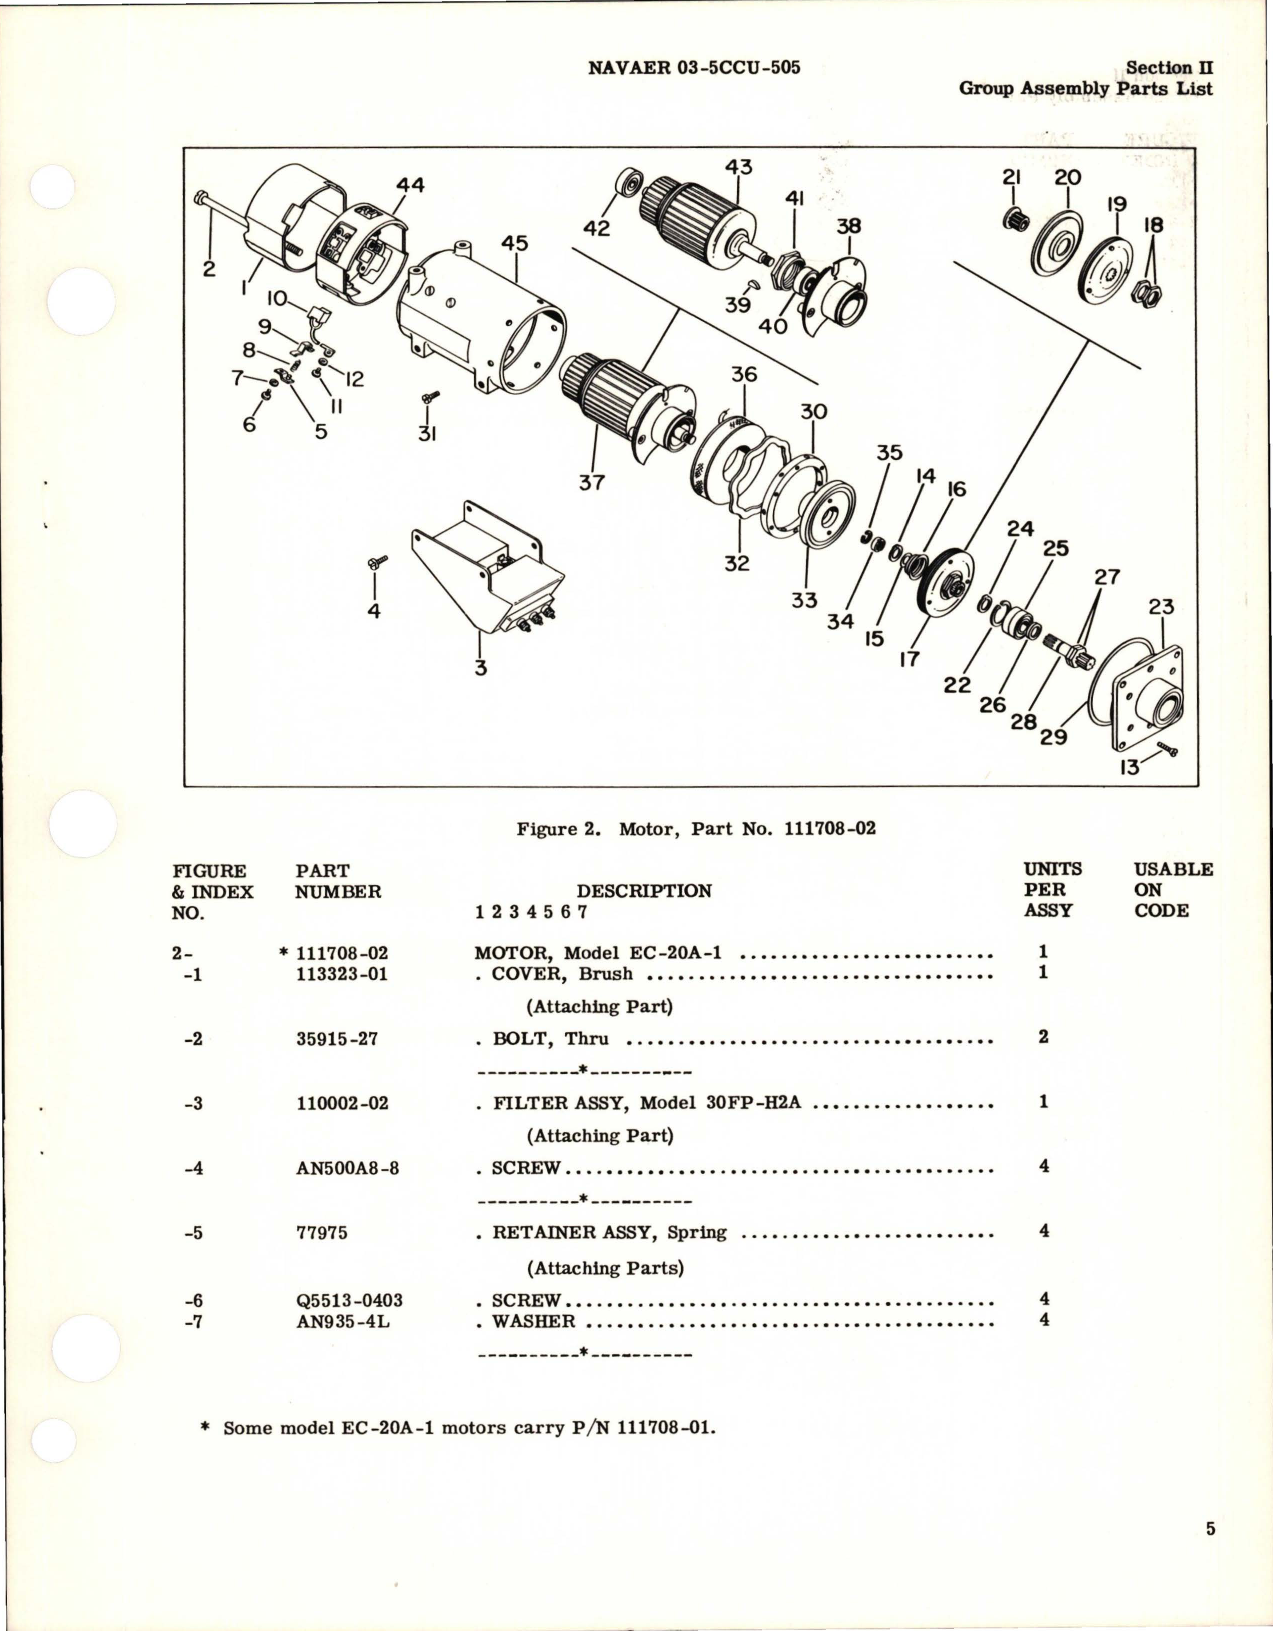 Sample page 7 from AirCorps Library document: Illustrated Parts Breakdown for E Frame Motor - Parts 111708-01, 111708-02, and 114320-01 